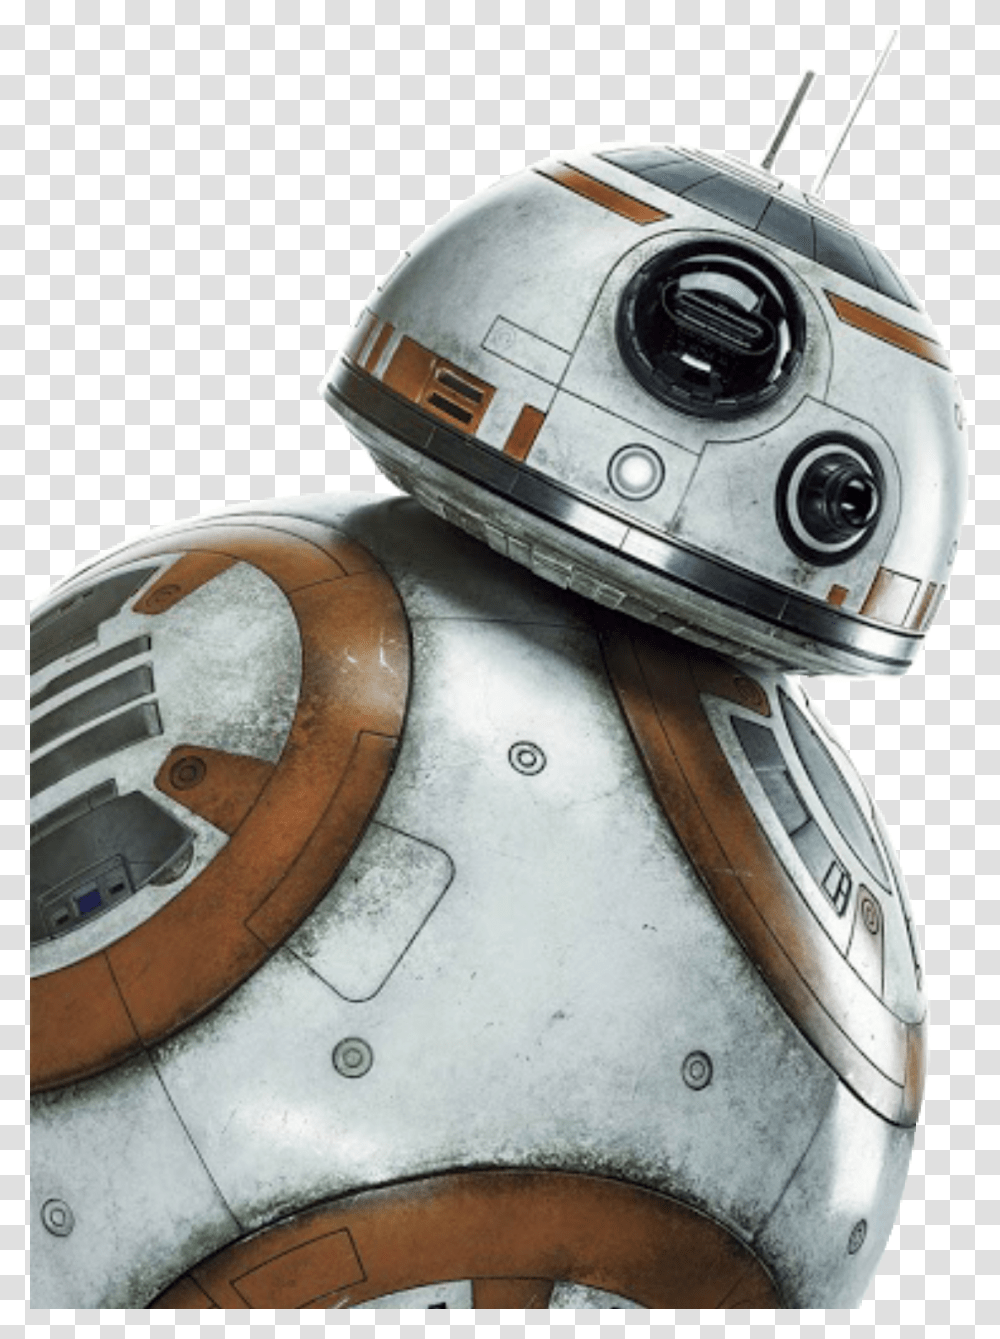 Starwars Maythe4thbewithyou Bb8 Starwars Freetoedit Art Black And White Star Wars Poster, Helmet, Apparel, Robot Transparent Png